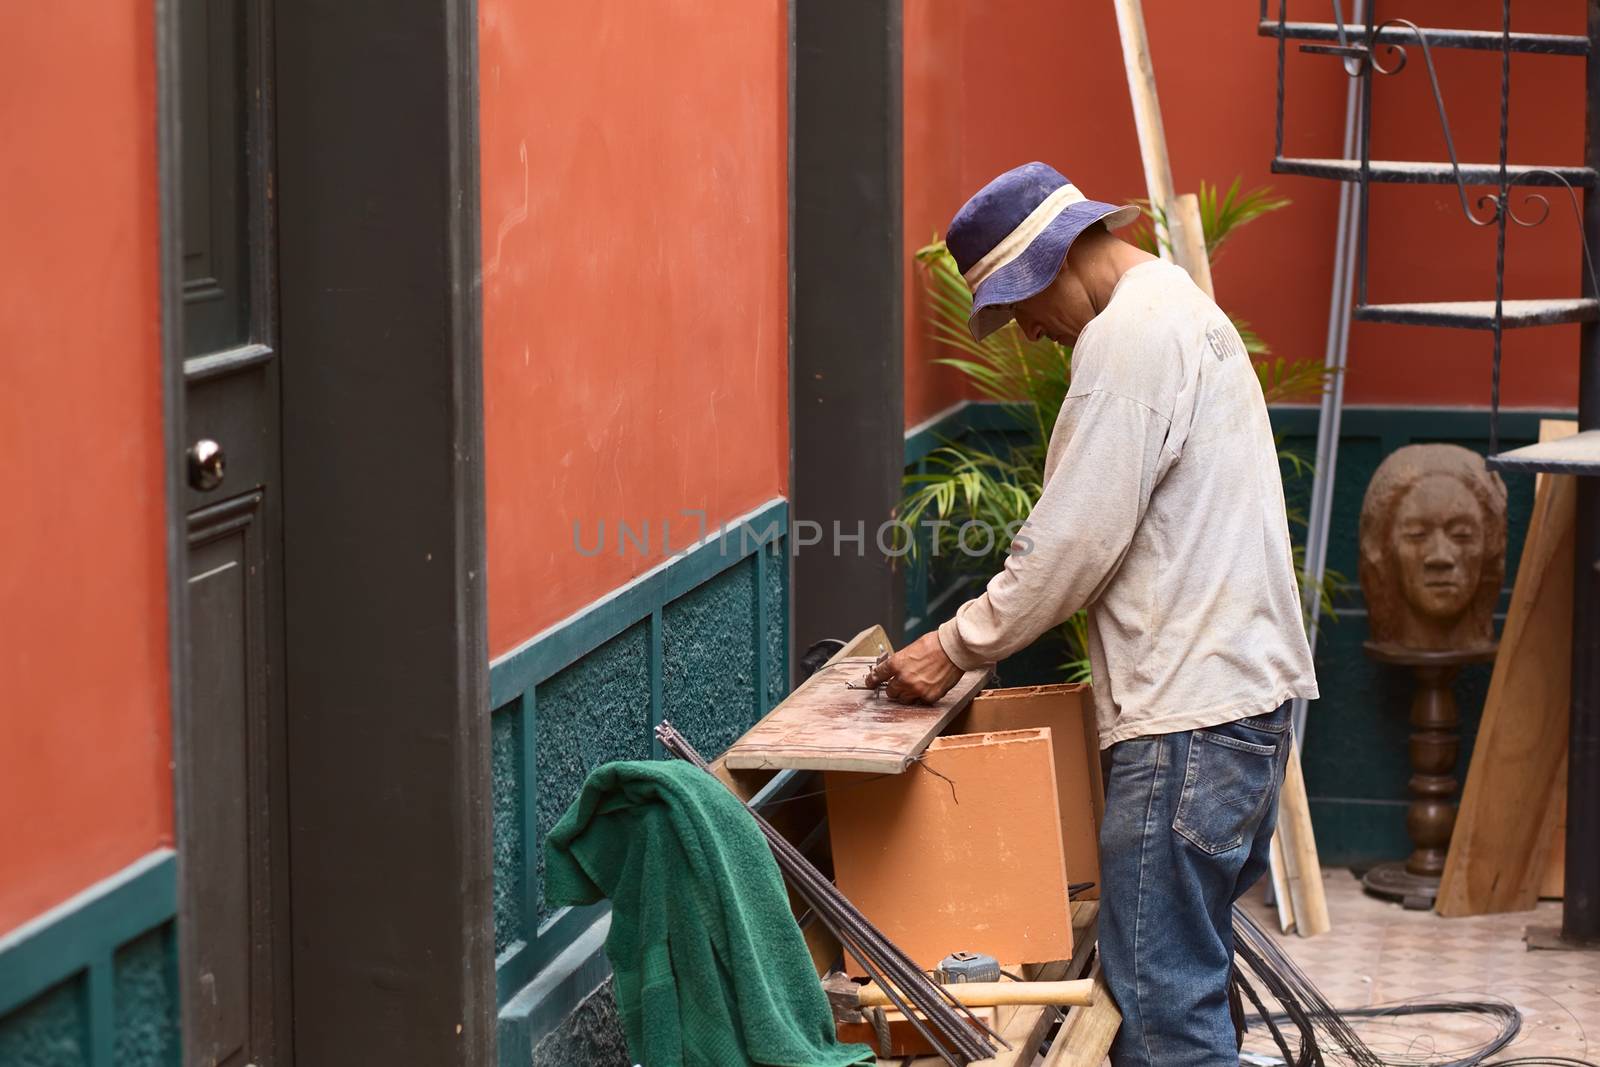 LIMA, PERU - MARCH 8, 2012: Unidentified construction worker bending steel for steel concrete column in Miraflores on March 8, 2012 in Lima, Peru.